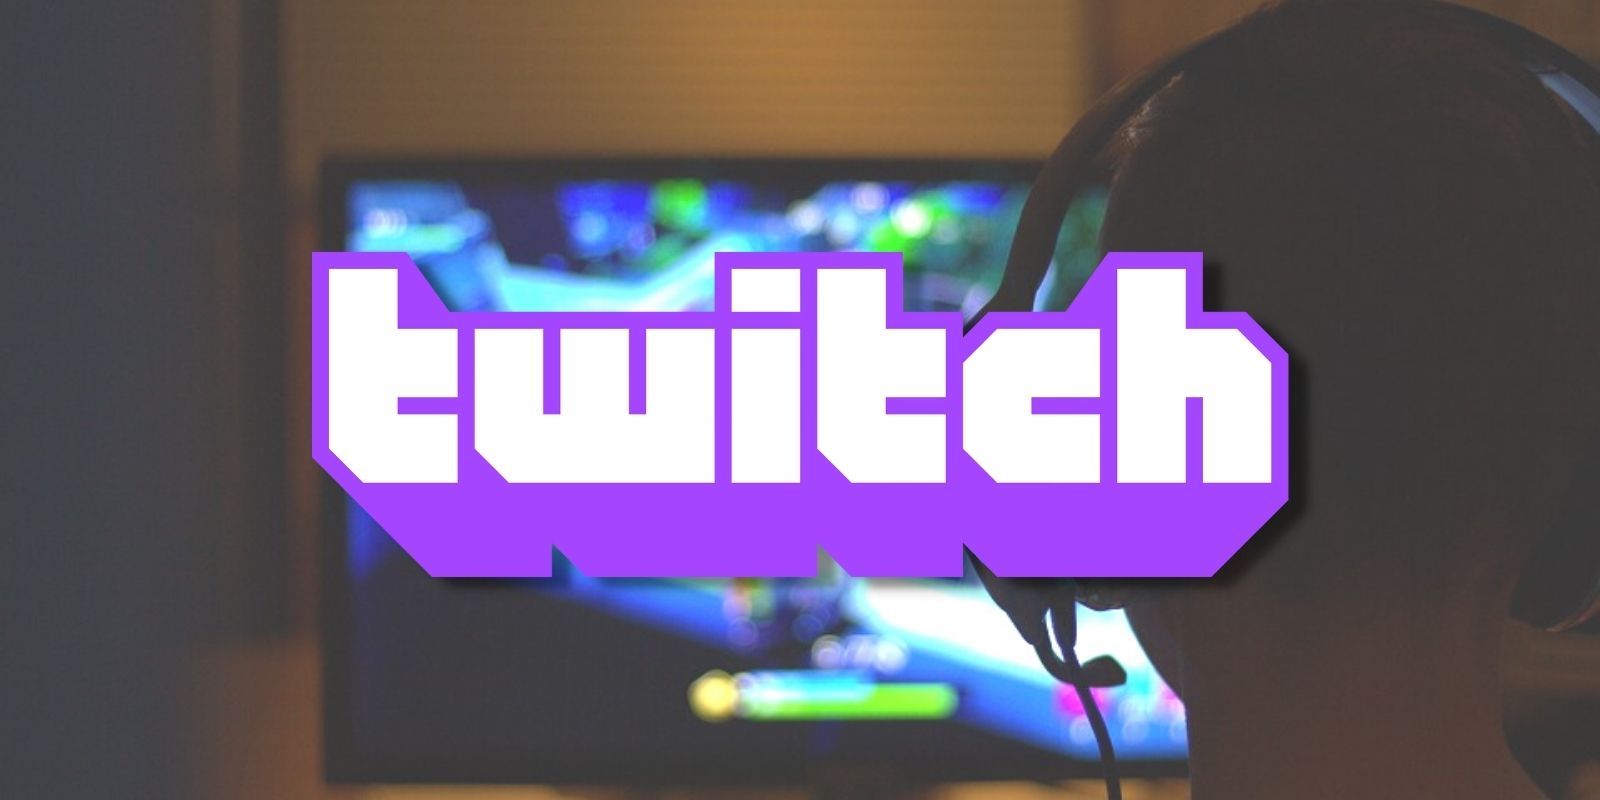 The Twitch logo over a shadowy gamer playing Fortnite